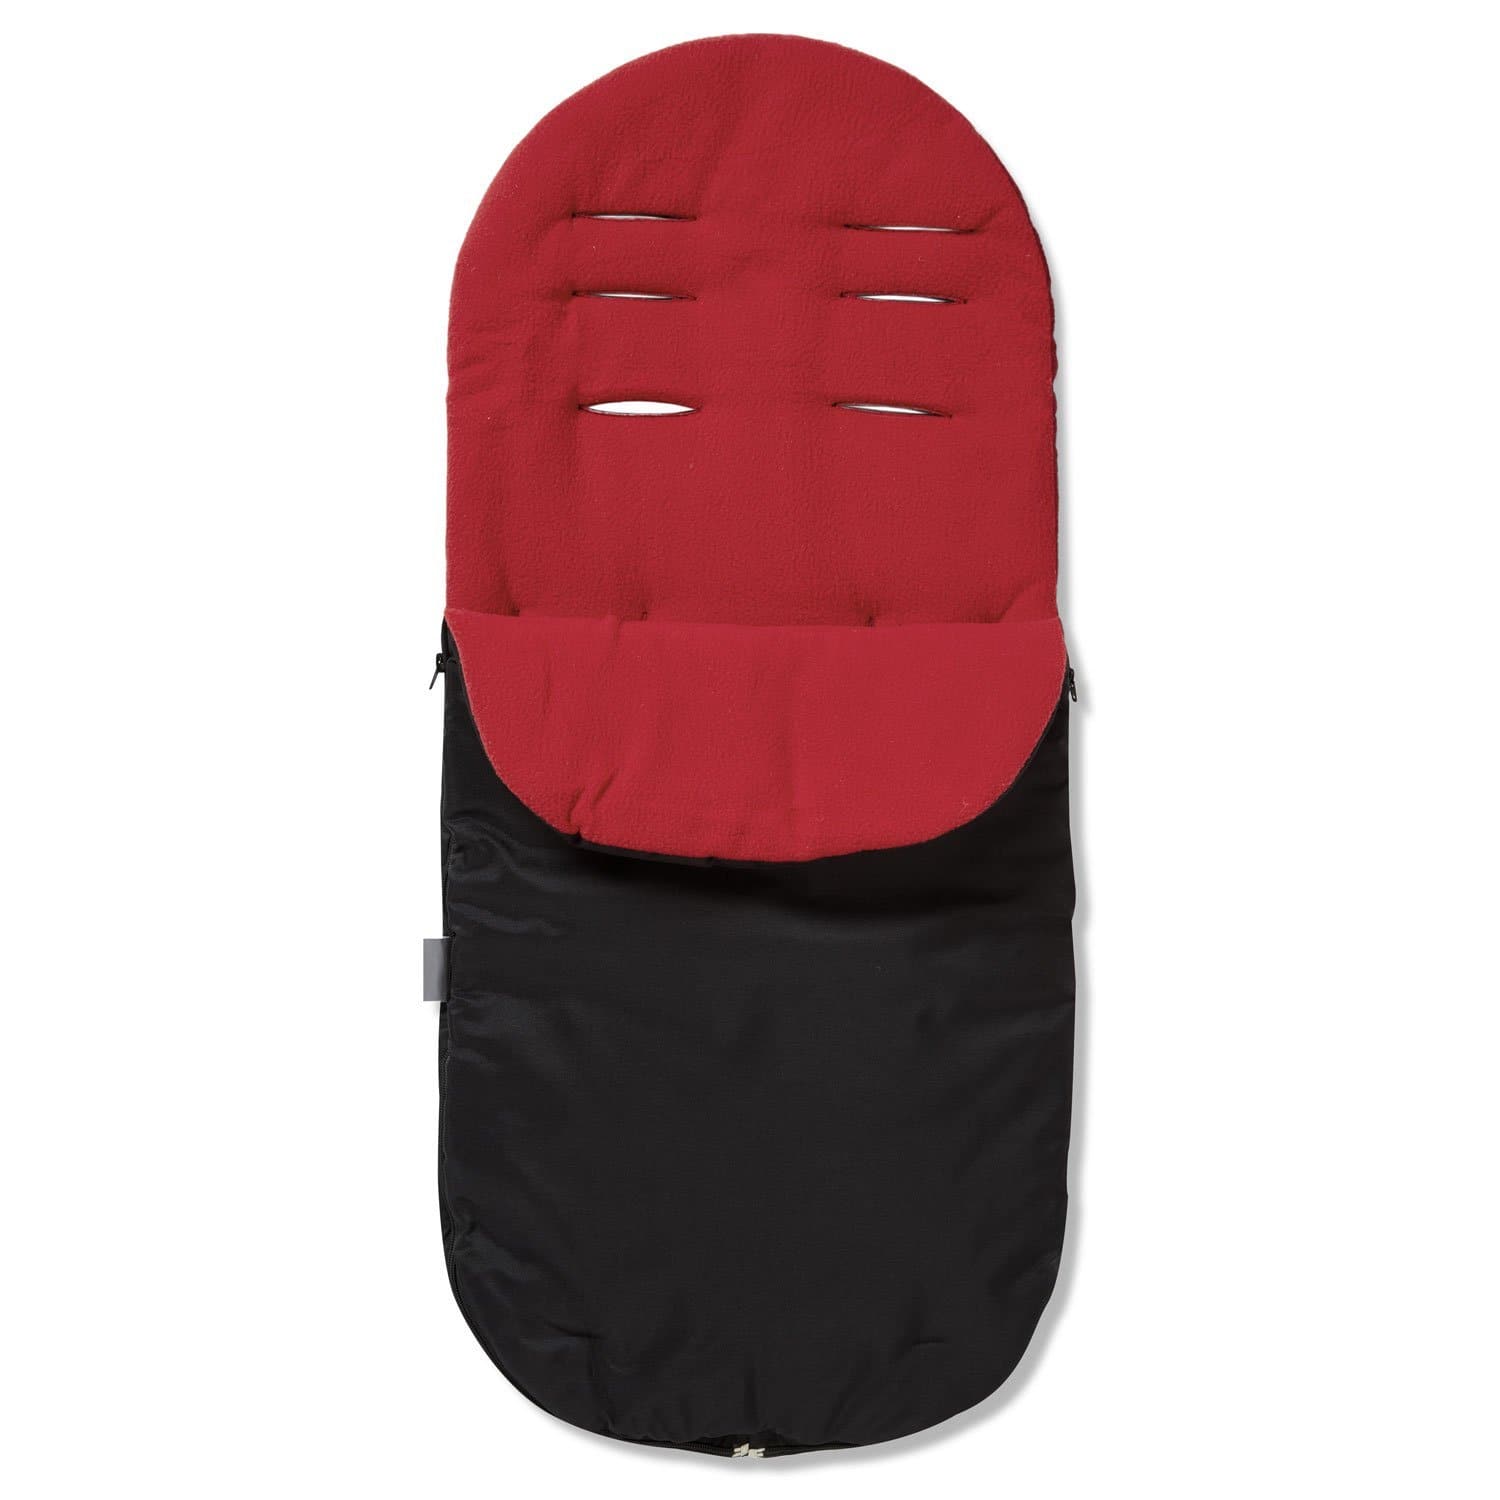 Footmuff / Cosy Toes Compatible with Nania - Red / Fits All Models | For Your Little One